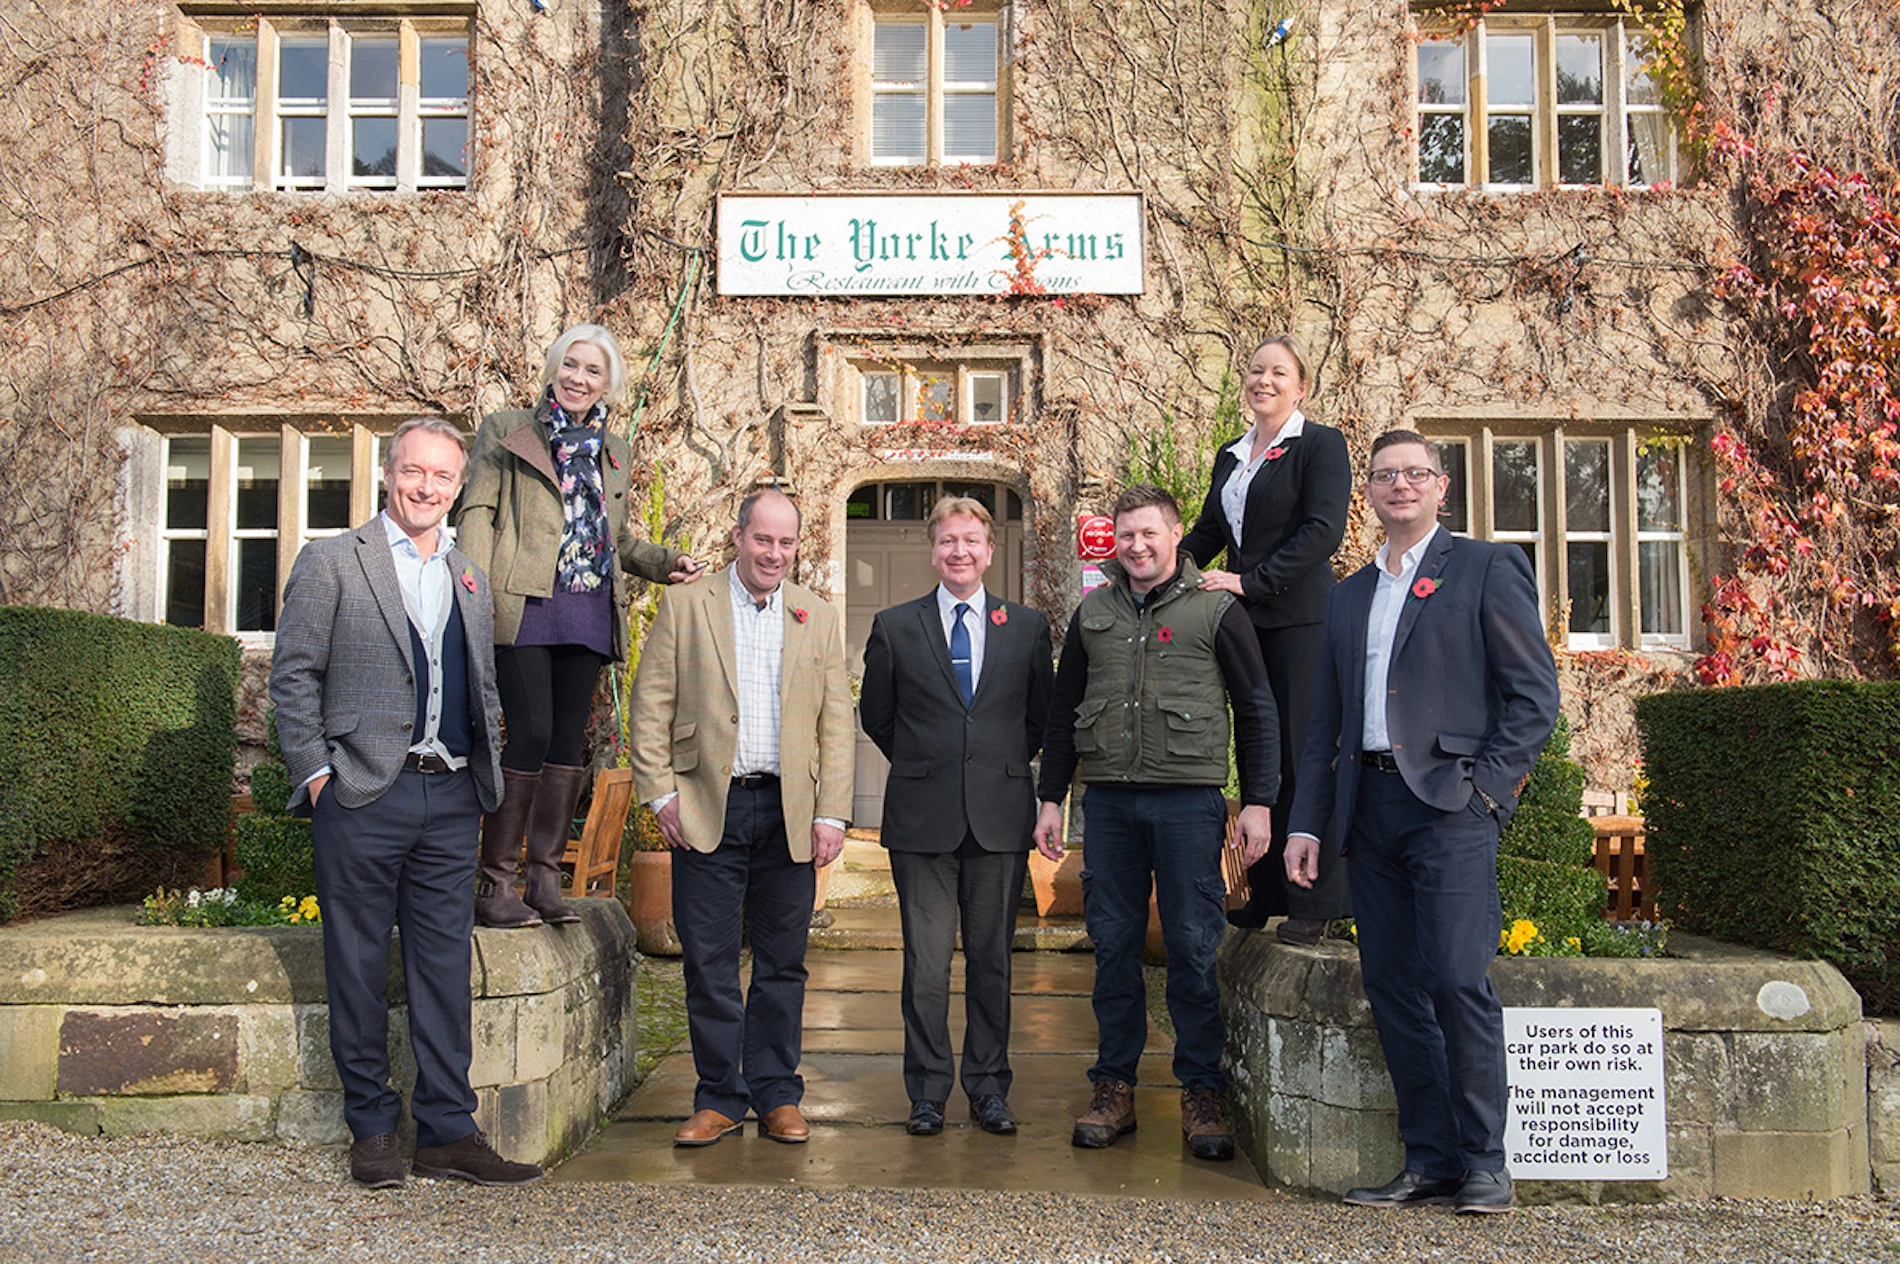 Jonathan Turner, Frances Atkins, Roger Olive, John Tullett, Waldemar Guzik, Kirsty Beverley from The Yorke Arms and Simon Crannage (Bowcliffe Hall).